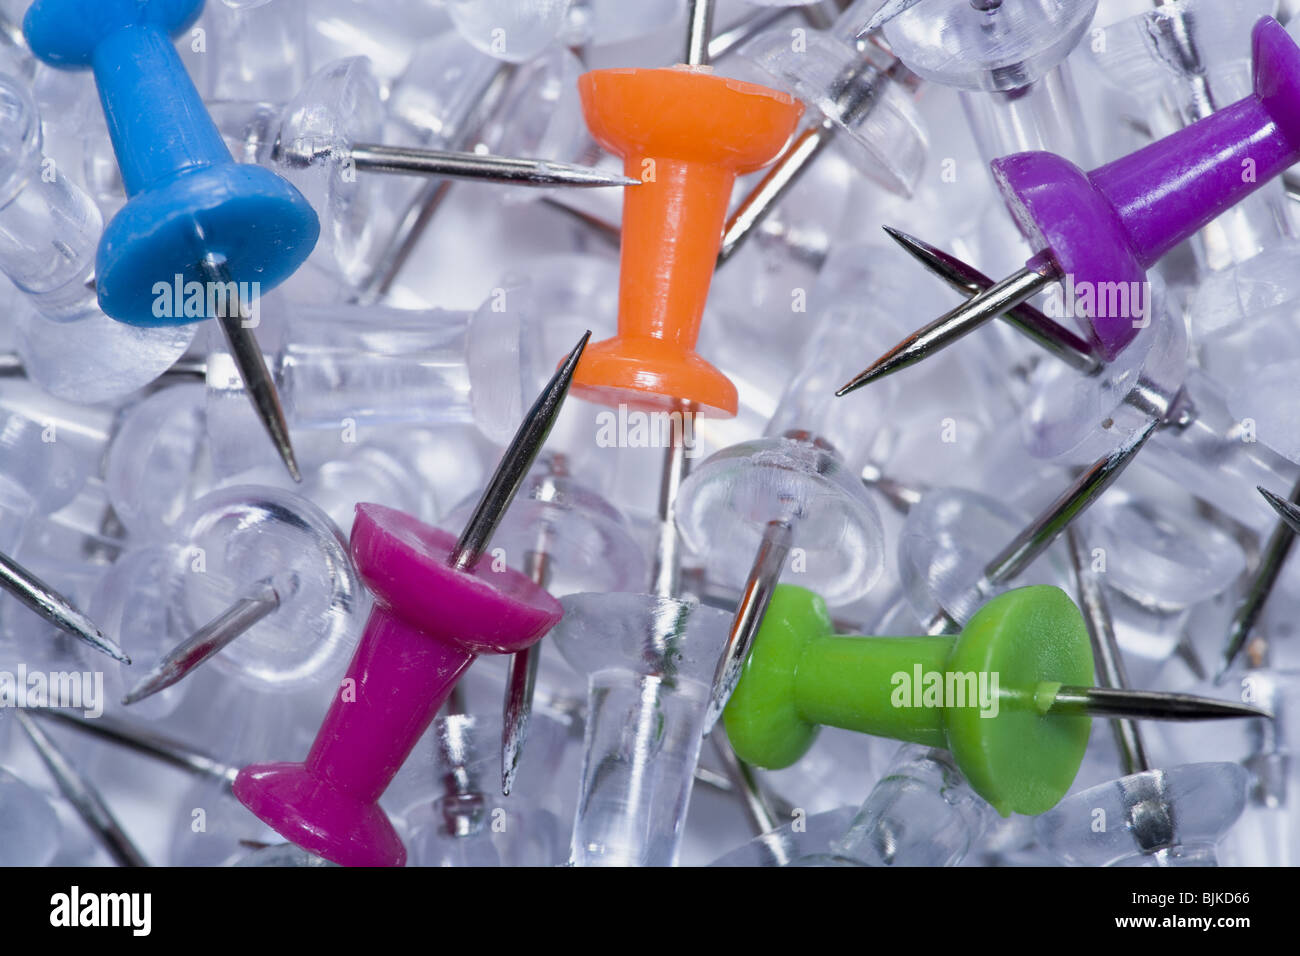 One black pushpin in a heap of clear pushpins Stock Photo